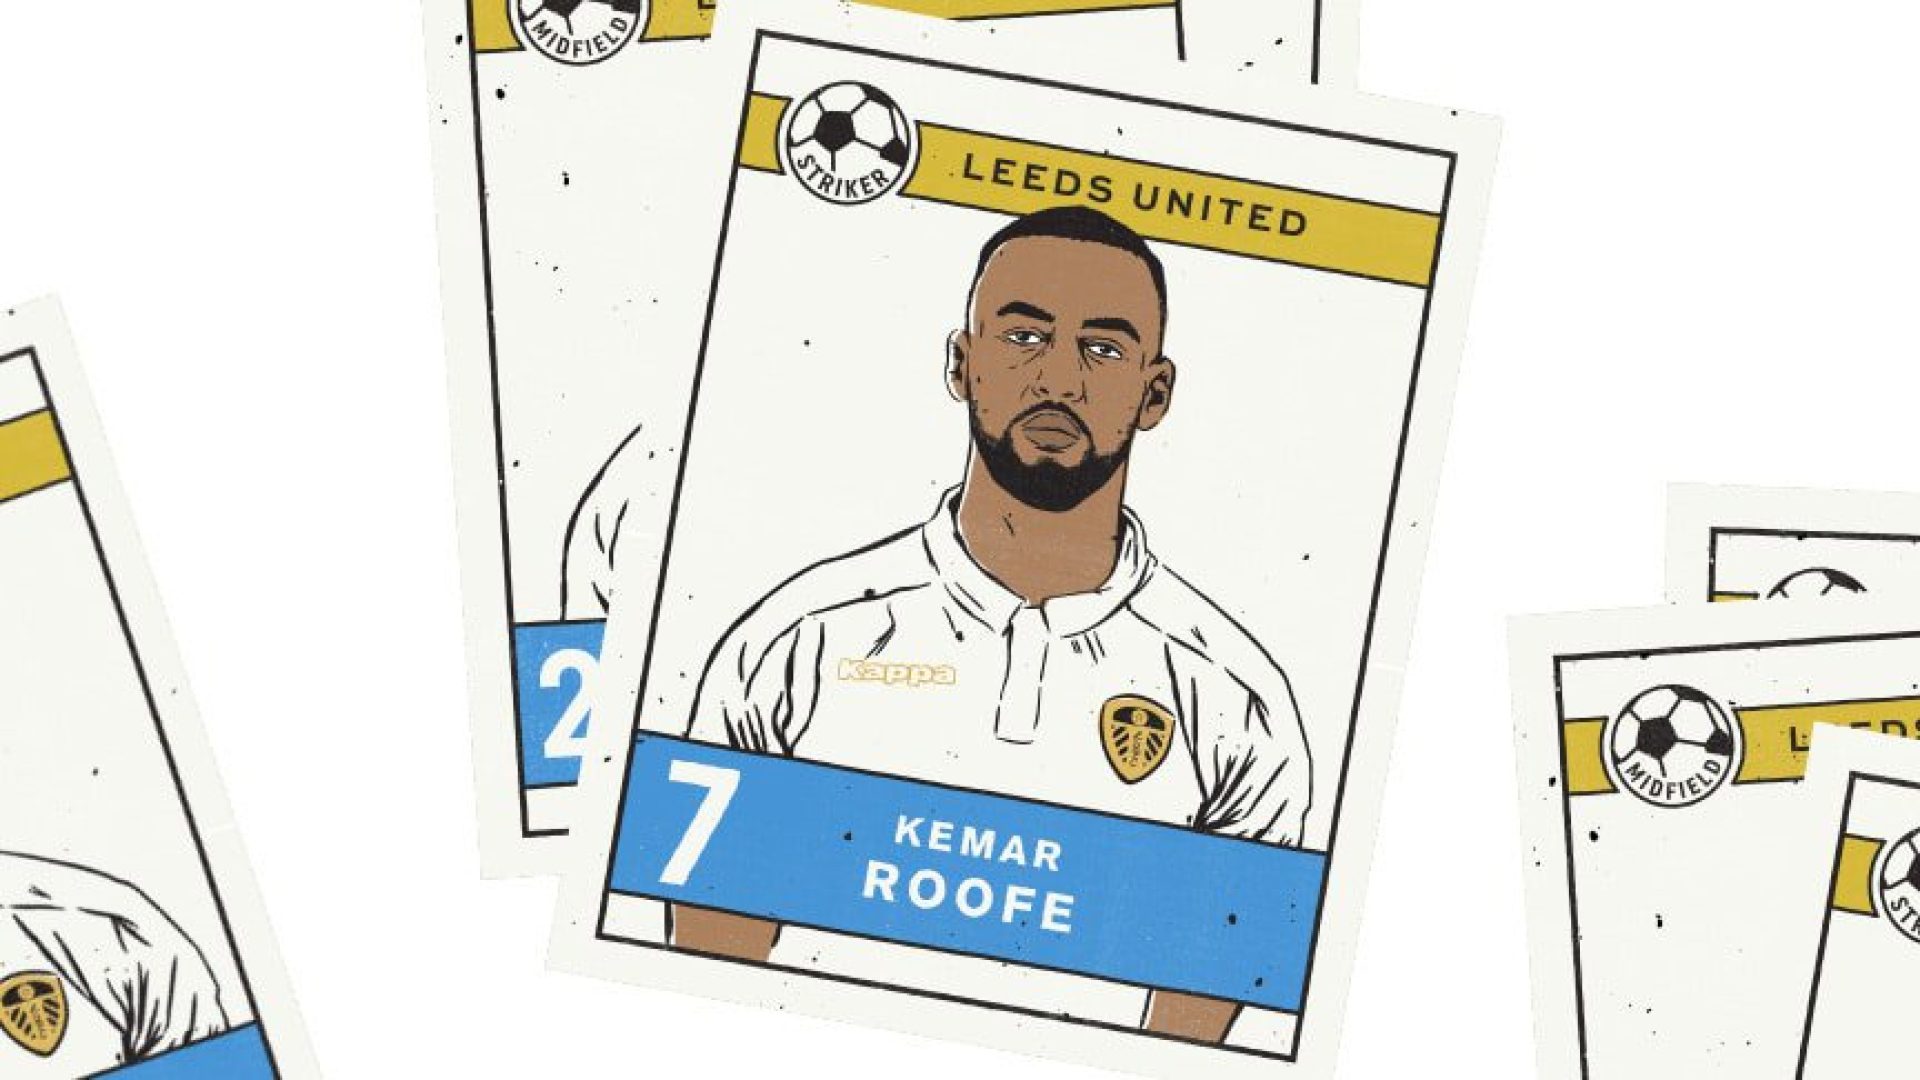 Issue02-roofe.jpg